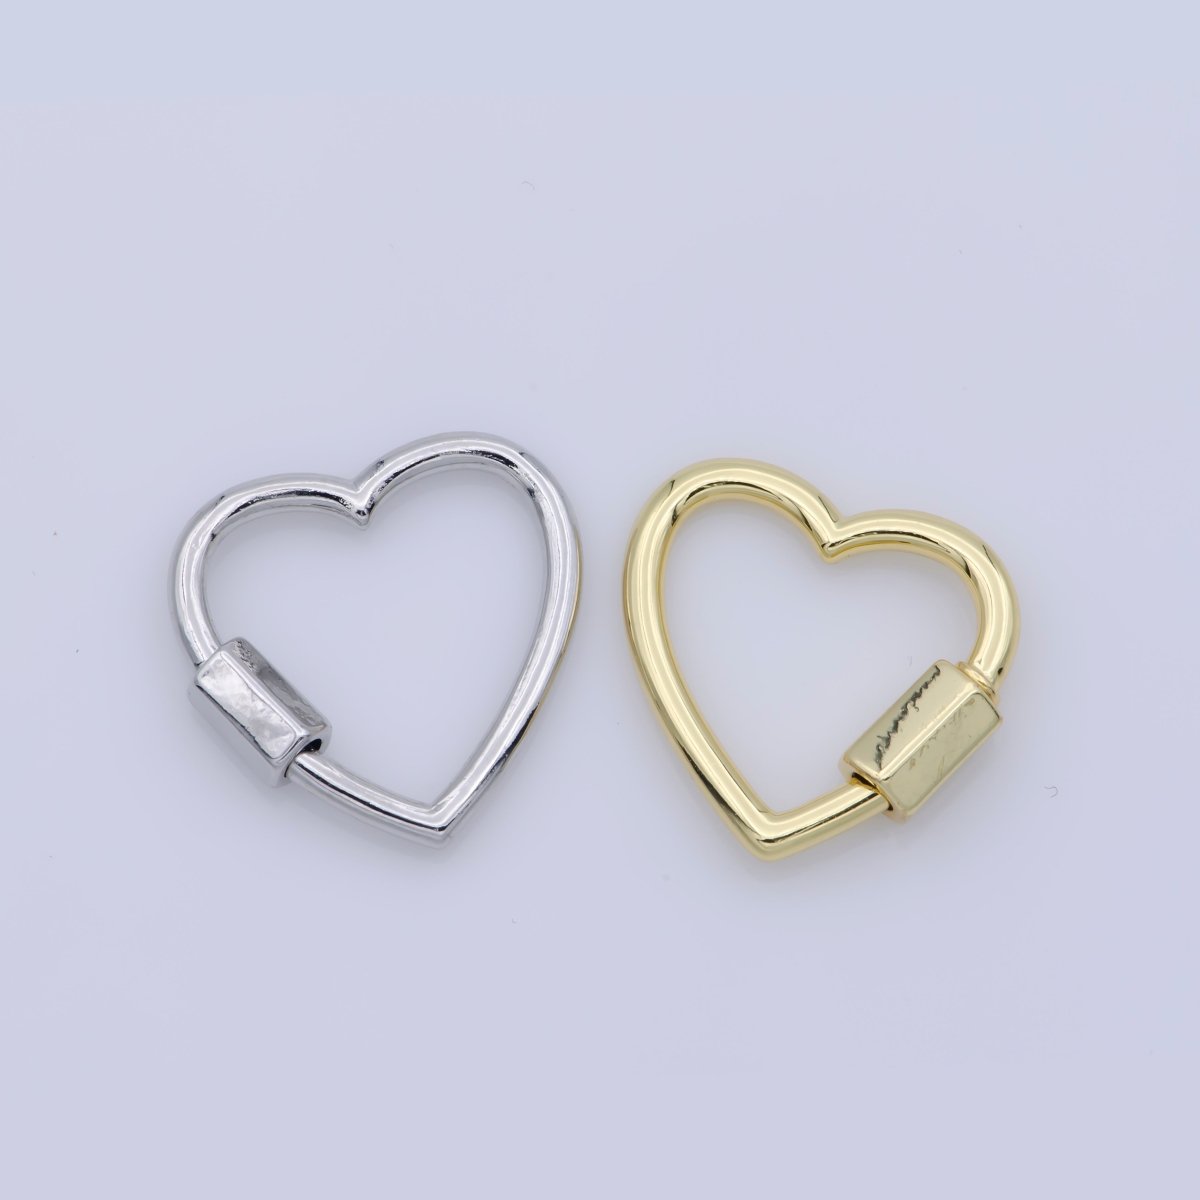 Dainty Heart Clasp in Gold Filled - White Gold Filled Love with Screw On Mechanism carabiner clasp Bracelet Clasp 20mmx19mm K-265 - DLUXCA